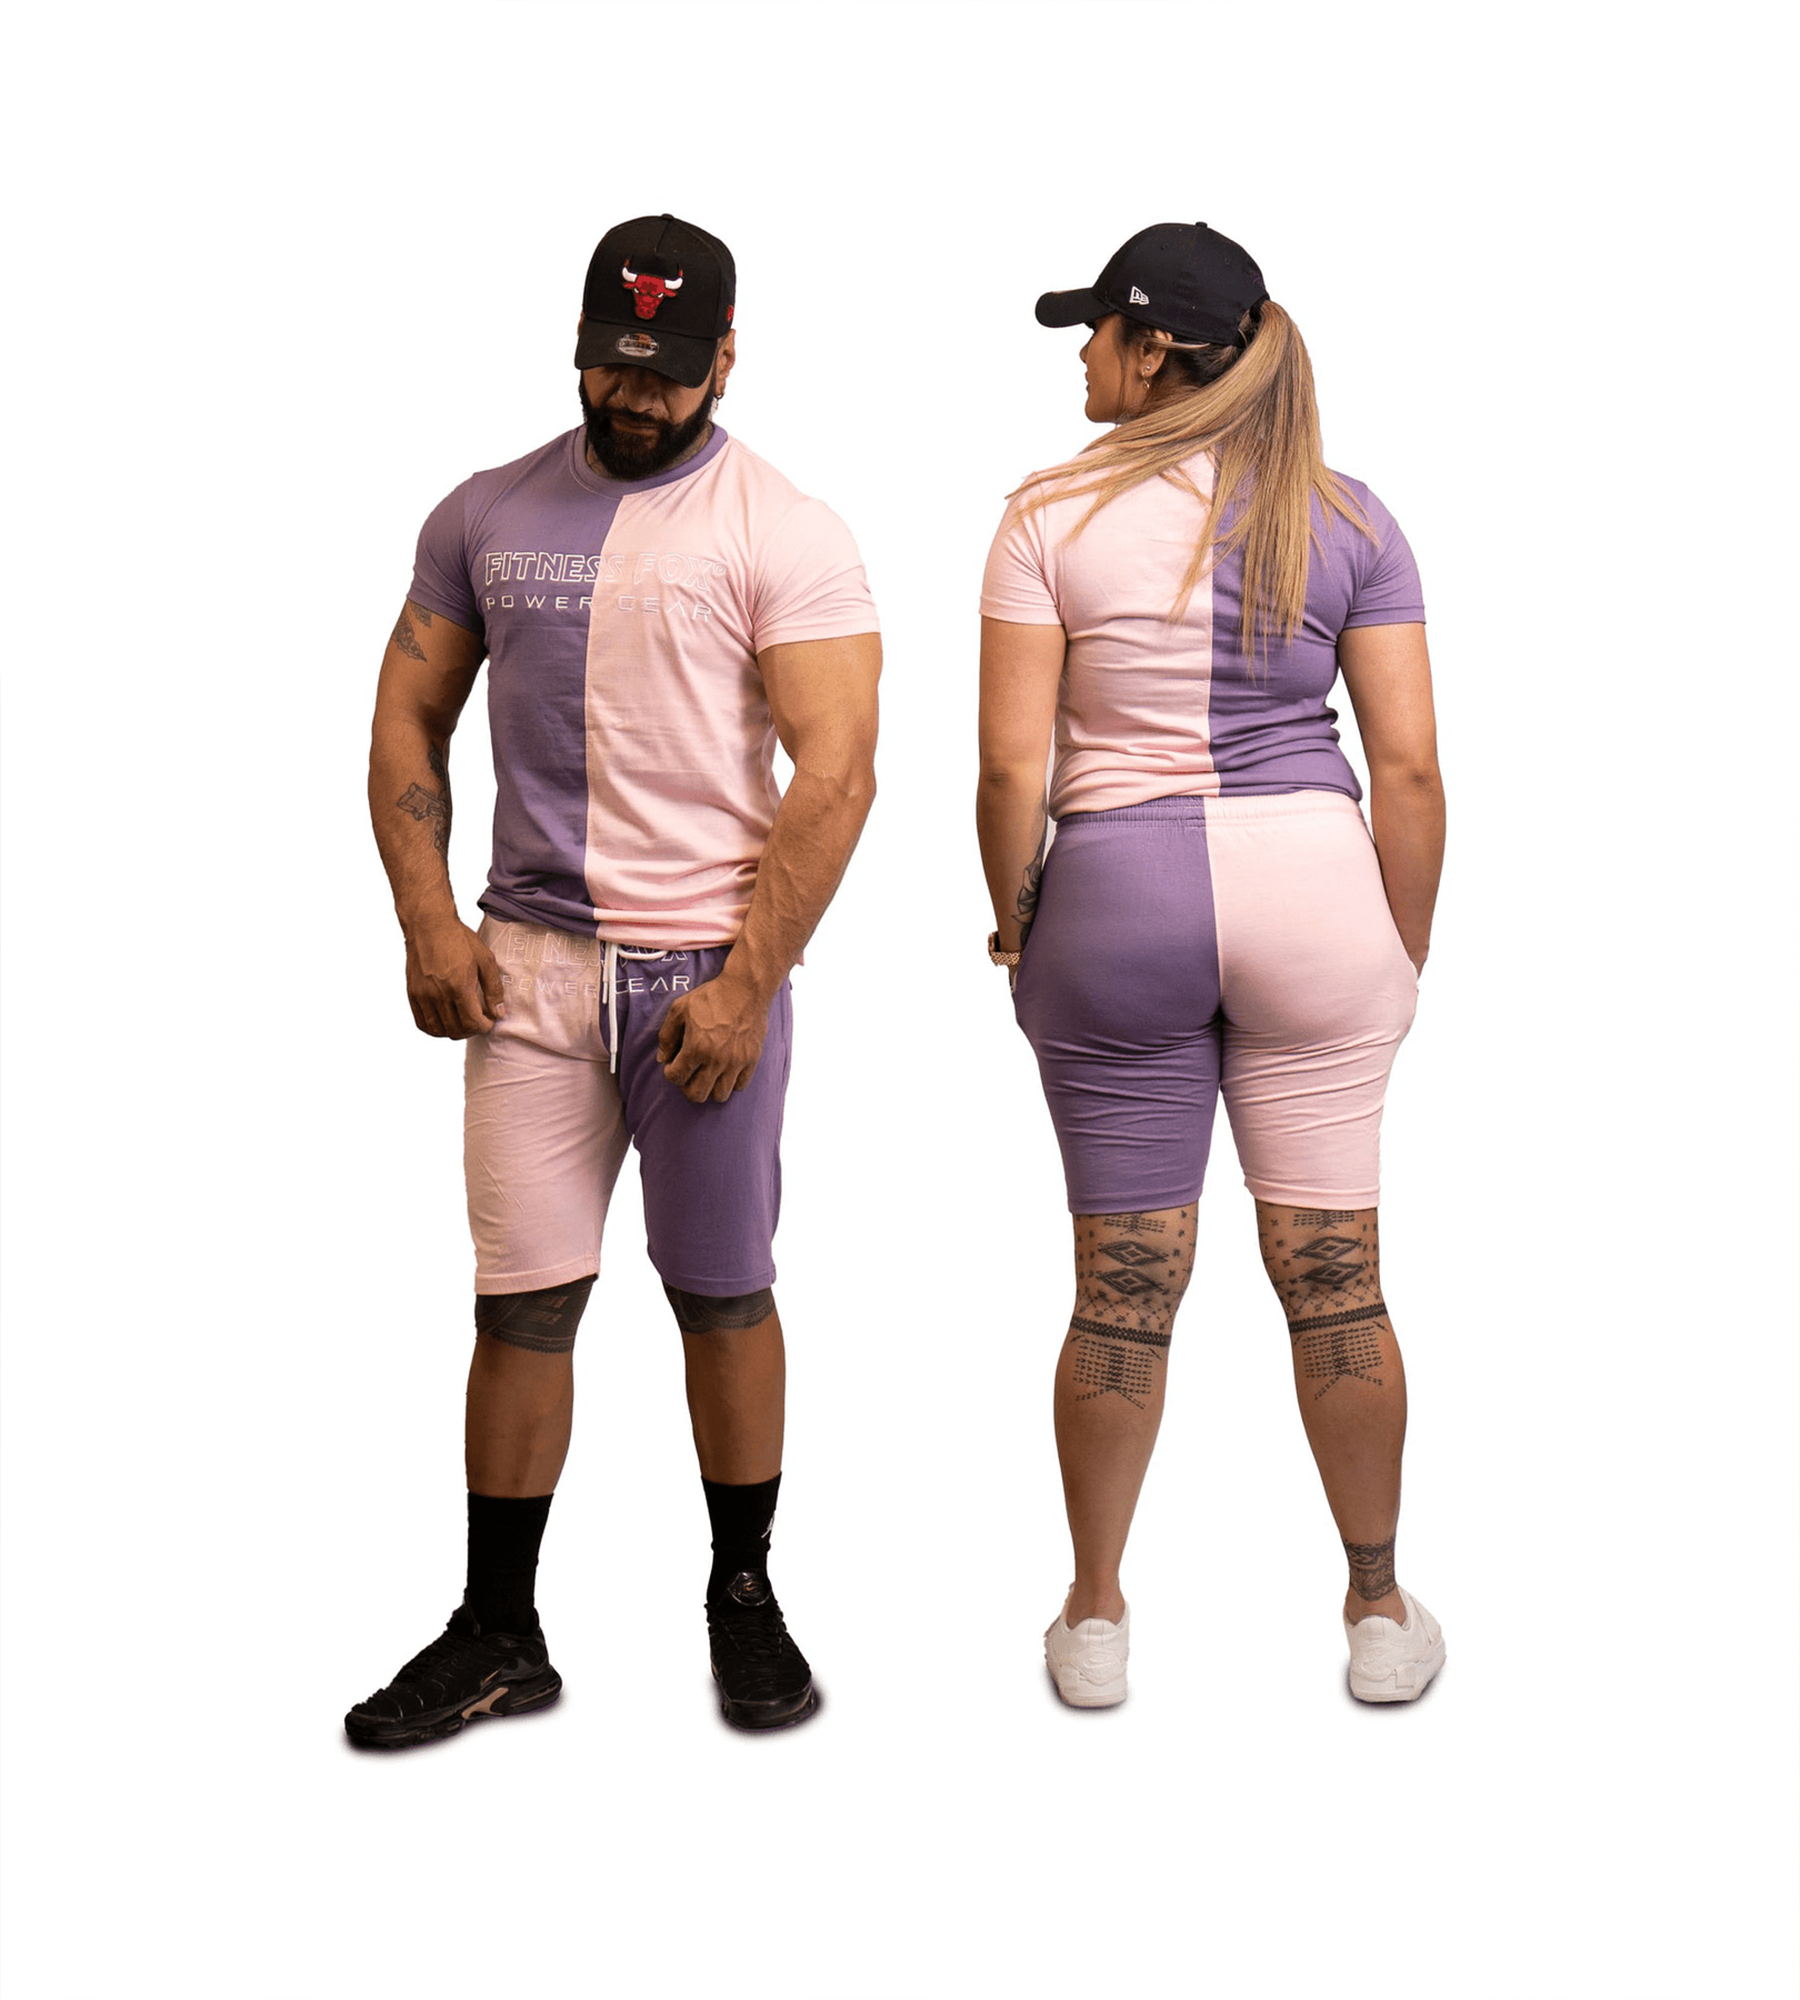 Fitnessfox UNISEX T-Shirts (Pink & Violet)